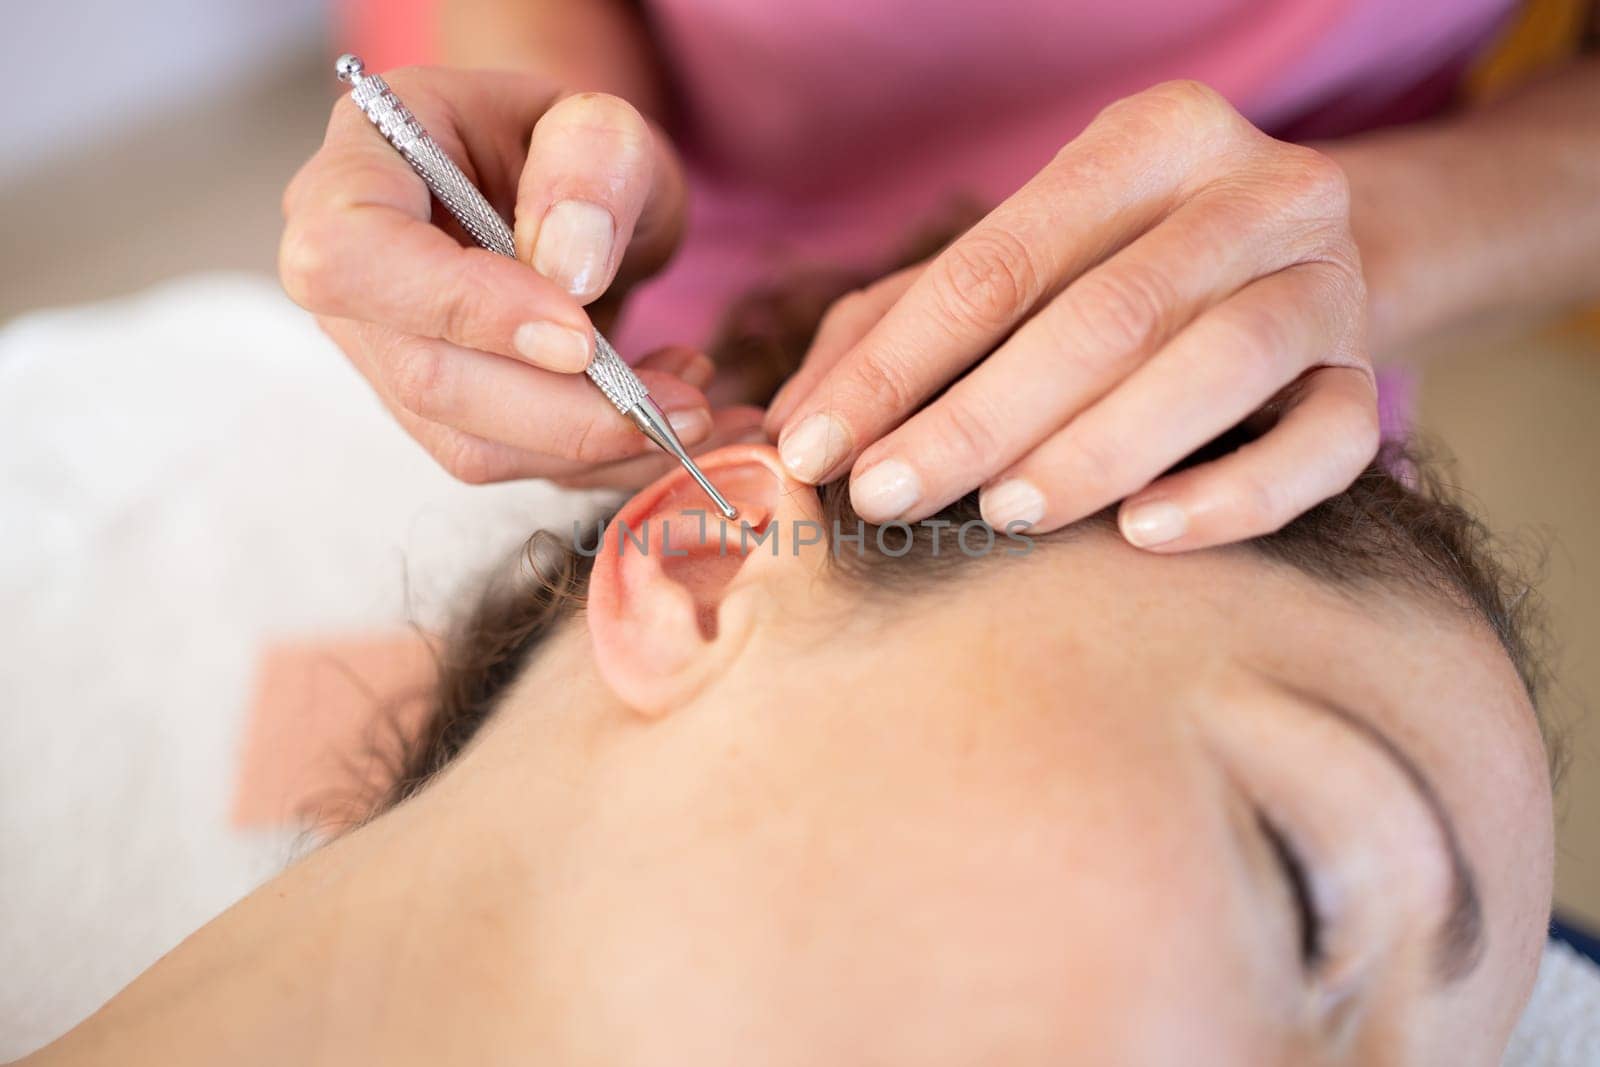 Crop chiropractor massaging ear of woman during auriculotherapy in beauty salon by javiindy